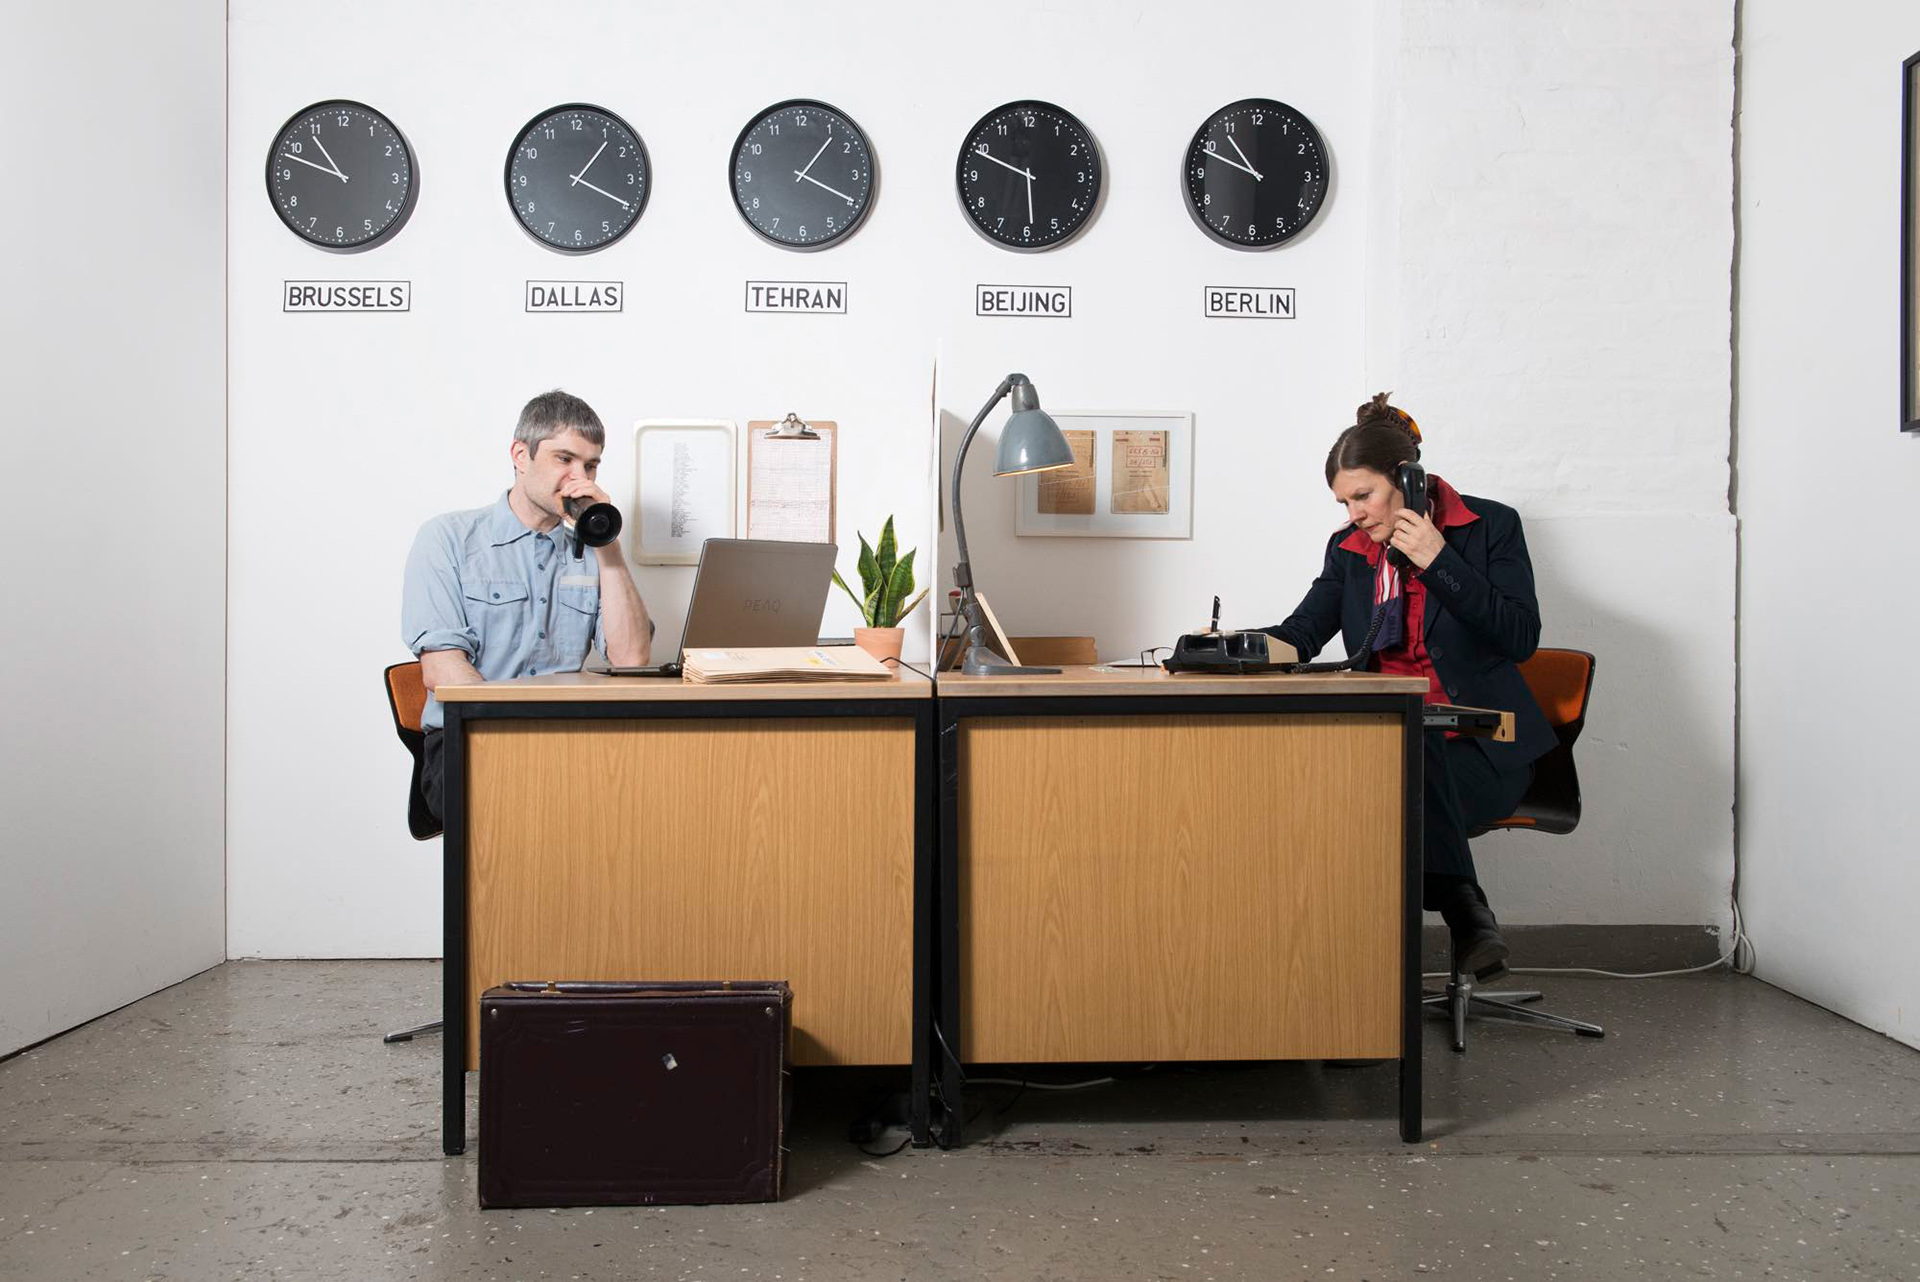 Office for Joint Administrative Intelligence performance image. Two people, on man one woman sitting across from one another in a cold oldish office space